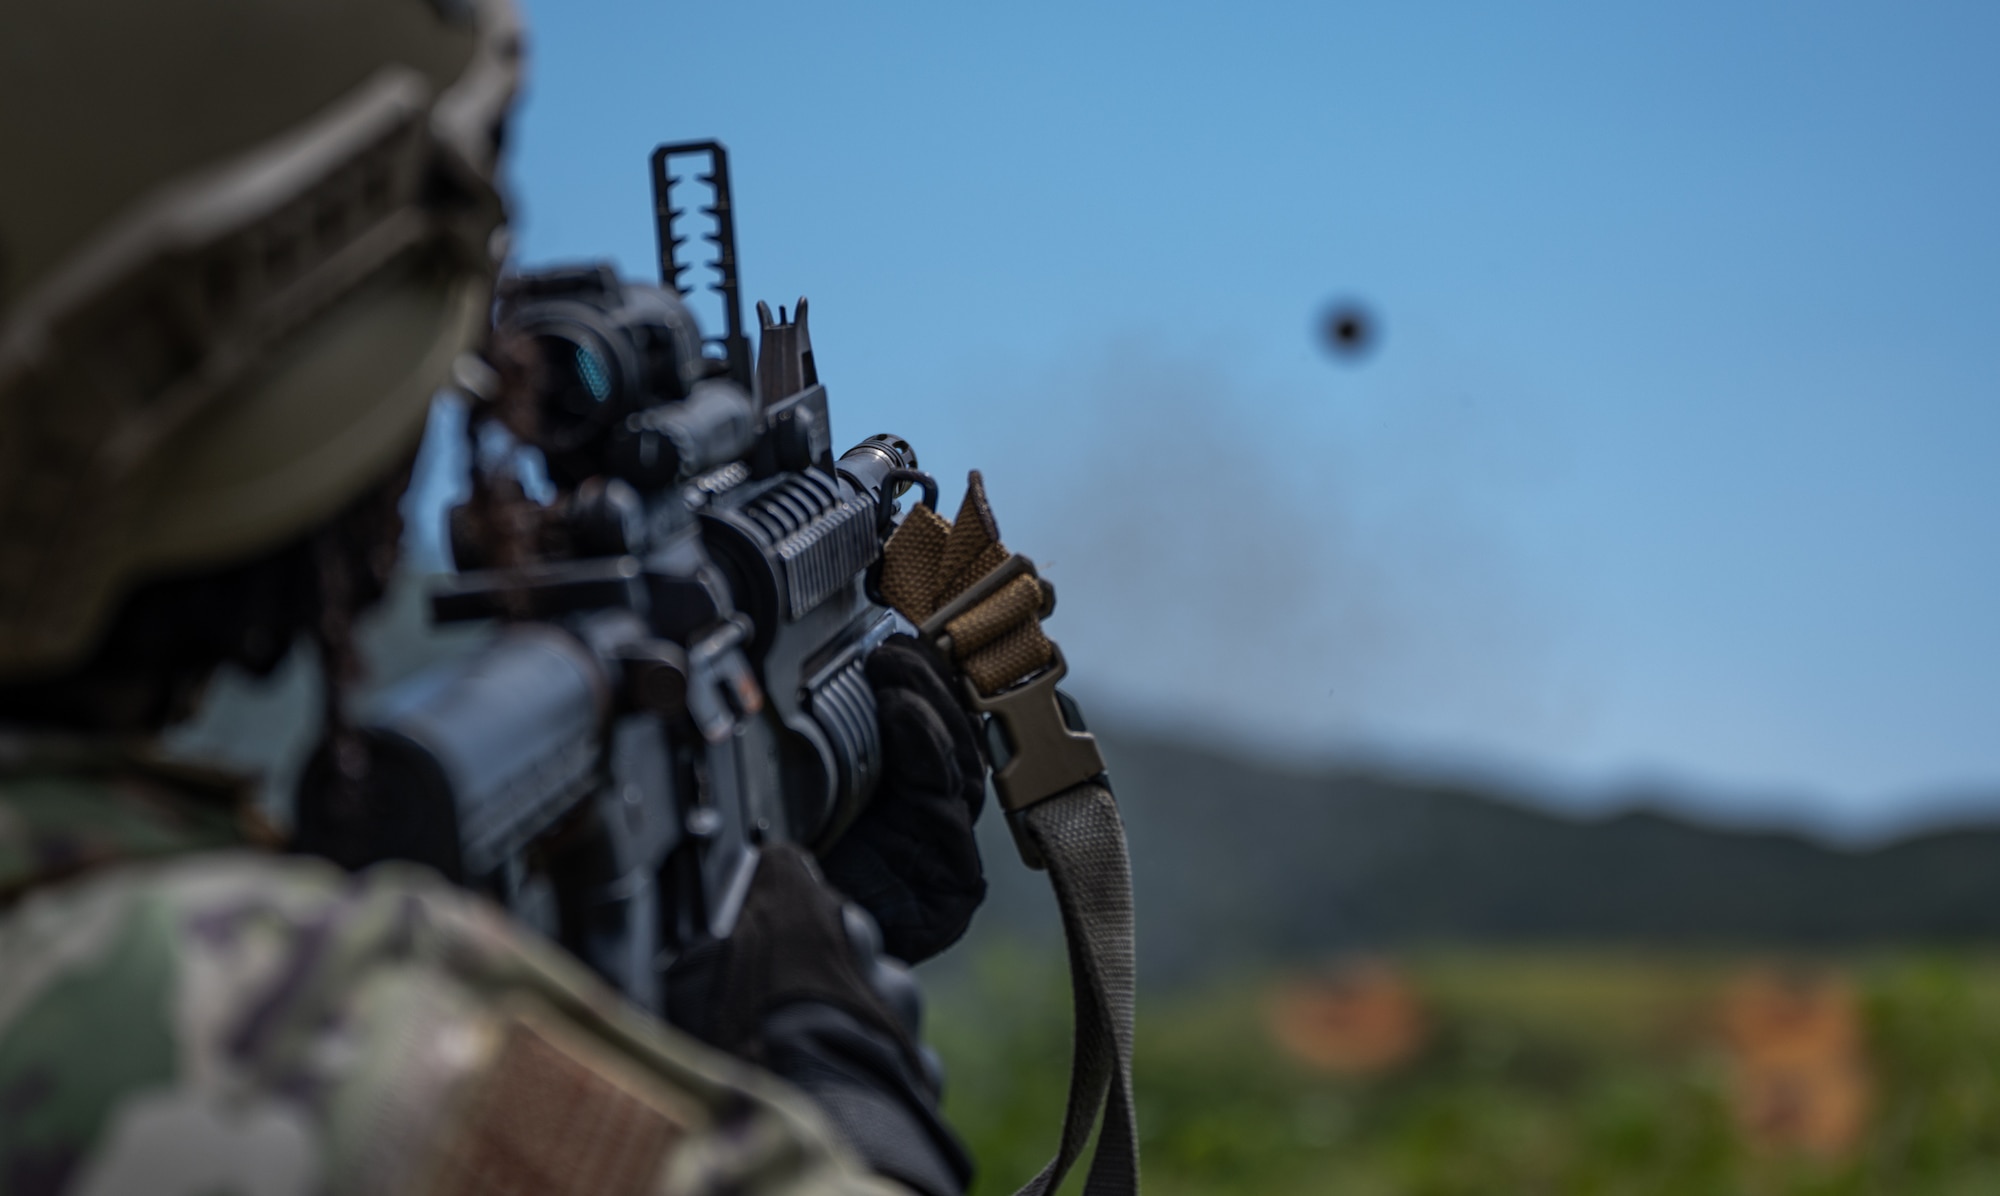 An 18th Security Forces Squadron member fires an M203 grenade launcher at Camp Hansen, Japan, Sept. 30, 2021. The M203 grenade launcher provides an extended range capability for ground troops. (U.S. Air Force photo by Airman 1st Class Stephen Pulter)